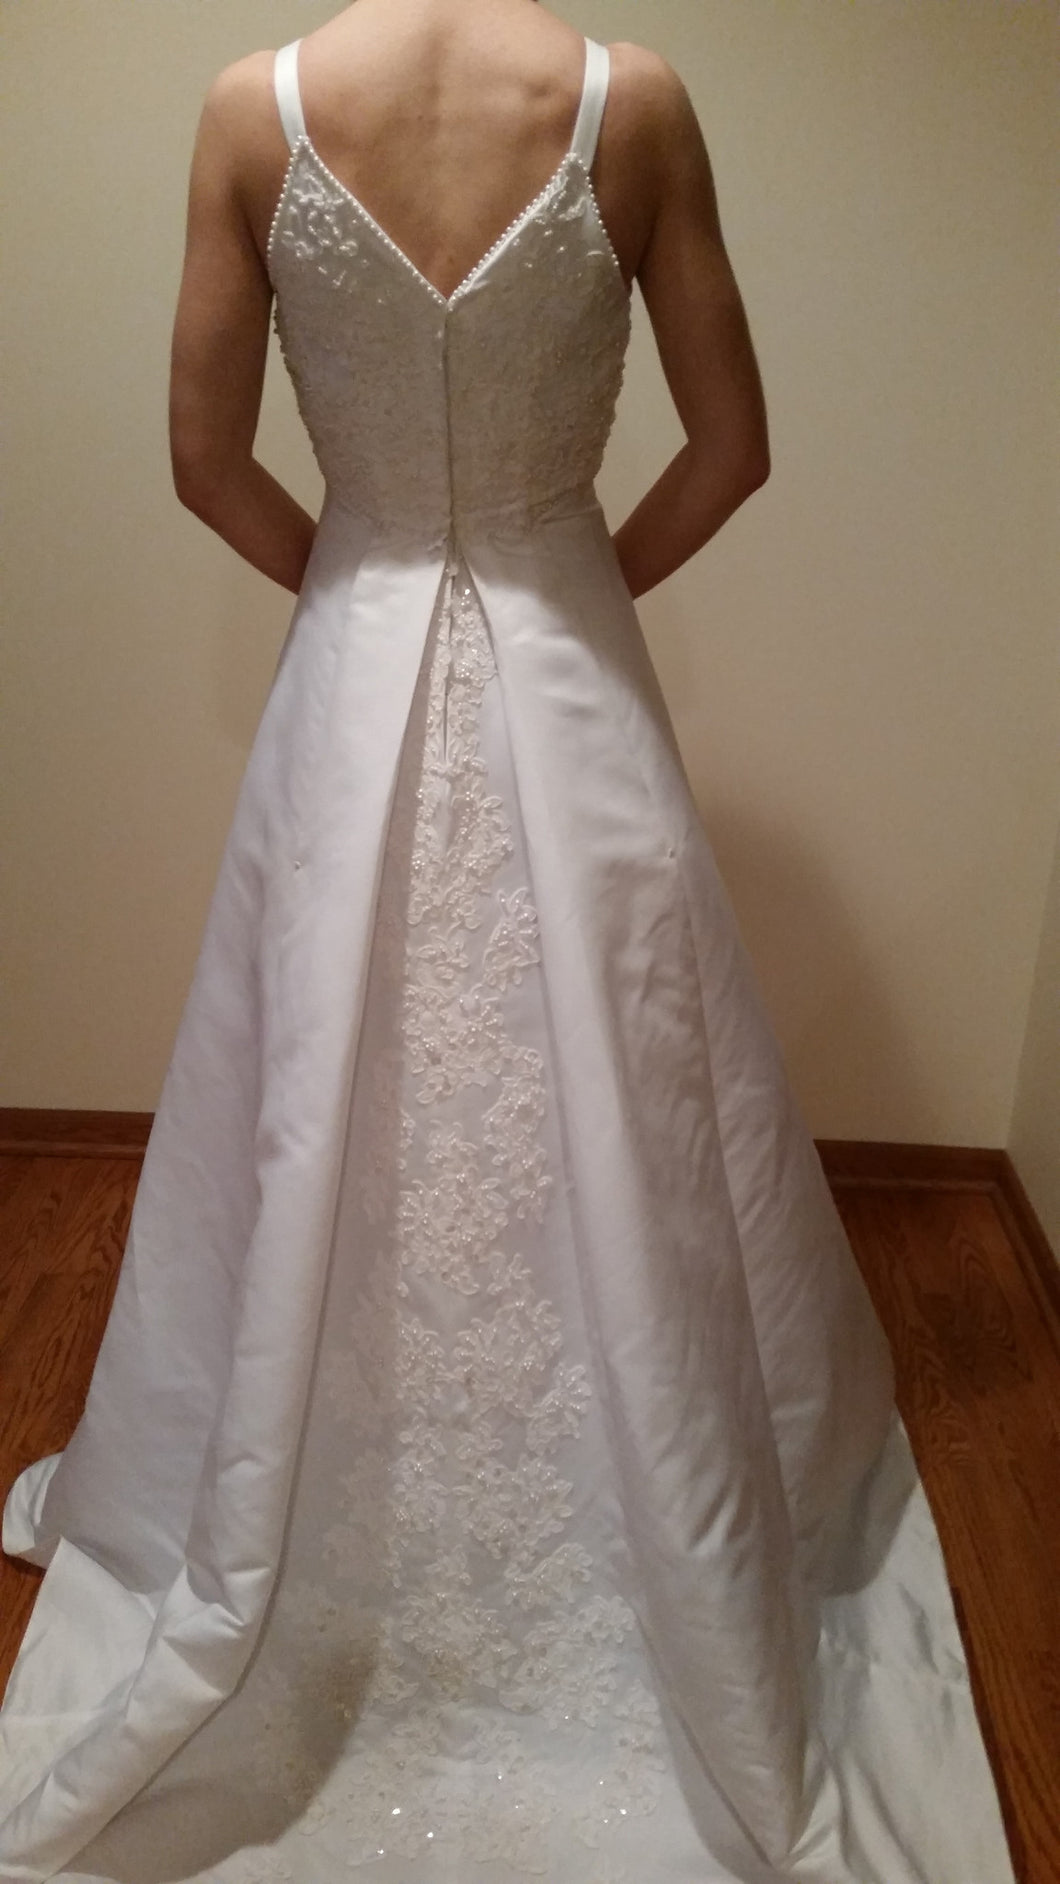 Alfred Angelo 'Satin' - alfred angelo - Nearly Newlywed Bridal Boutique - 1